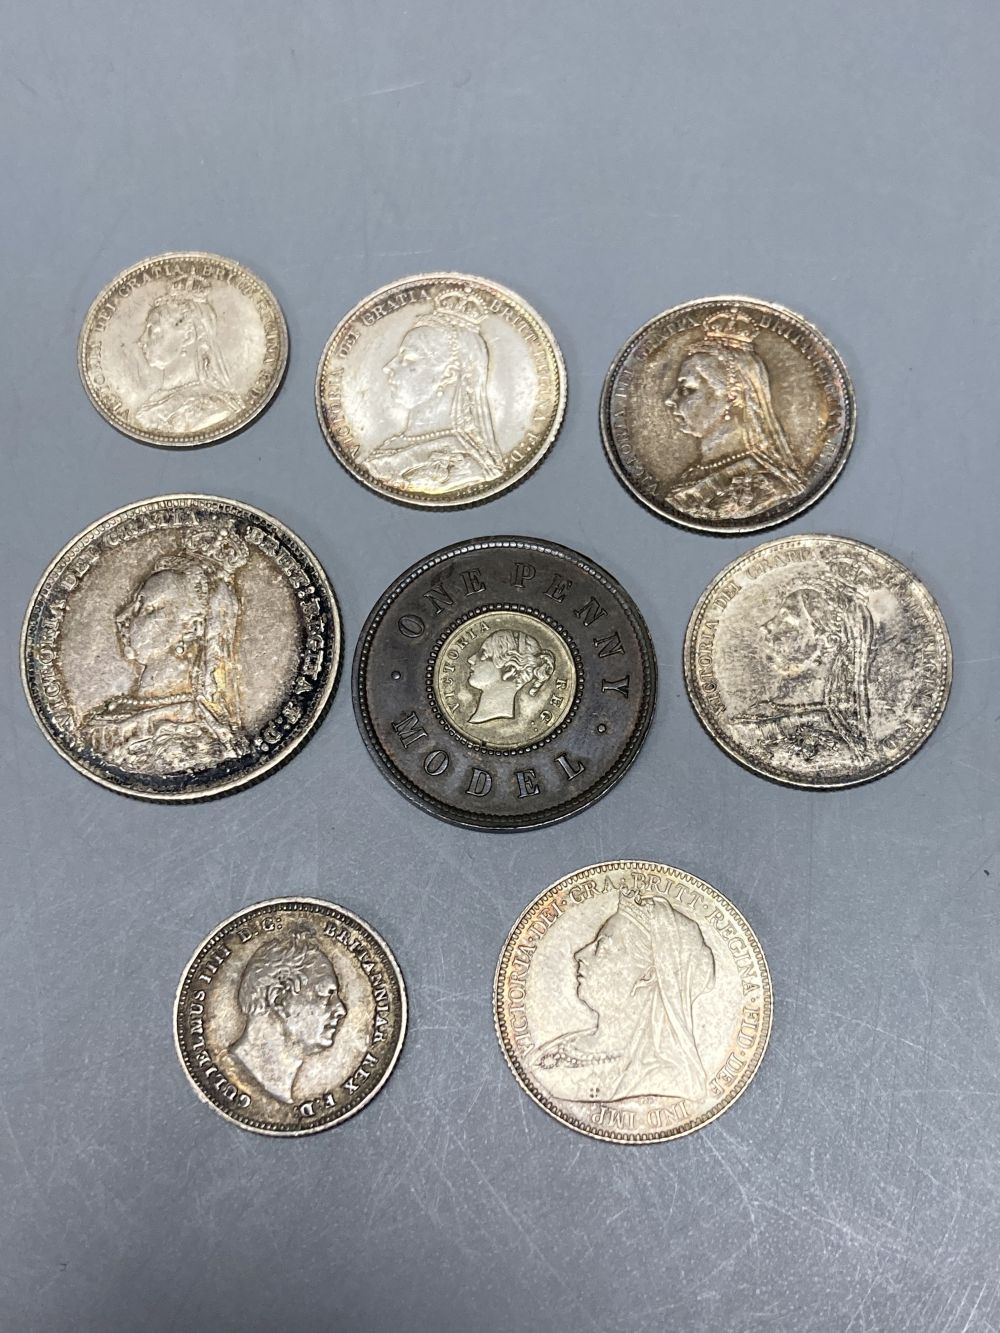 Great Britain, Queen Victoria, 1837-1901, One Penny Model, four sixpence coins and a threepence together with a William IV four pence,